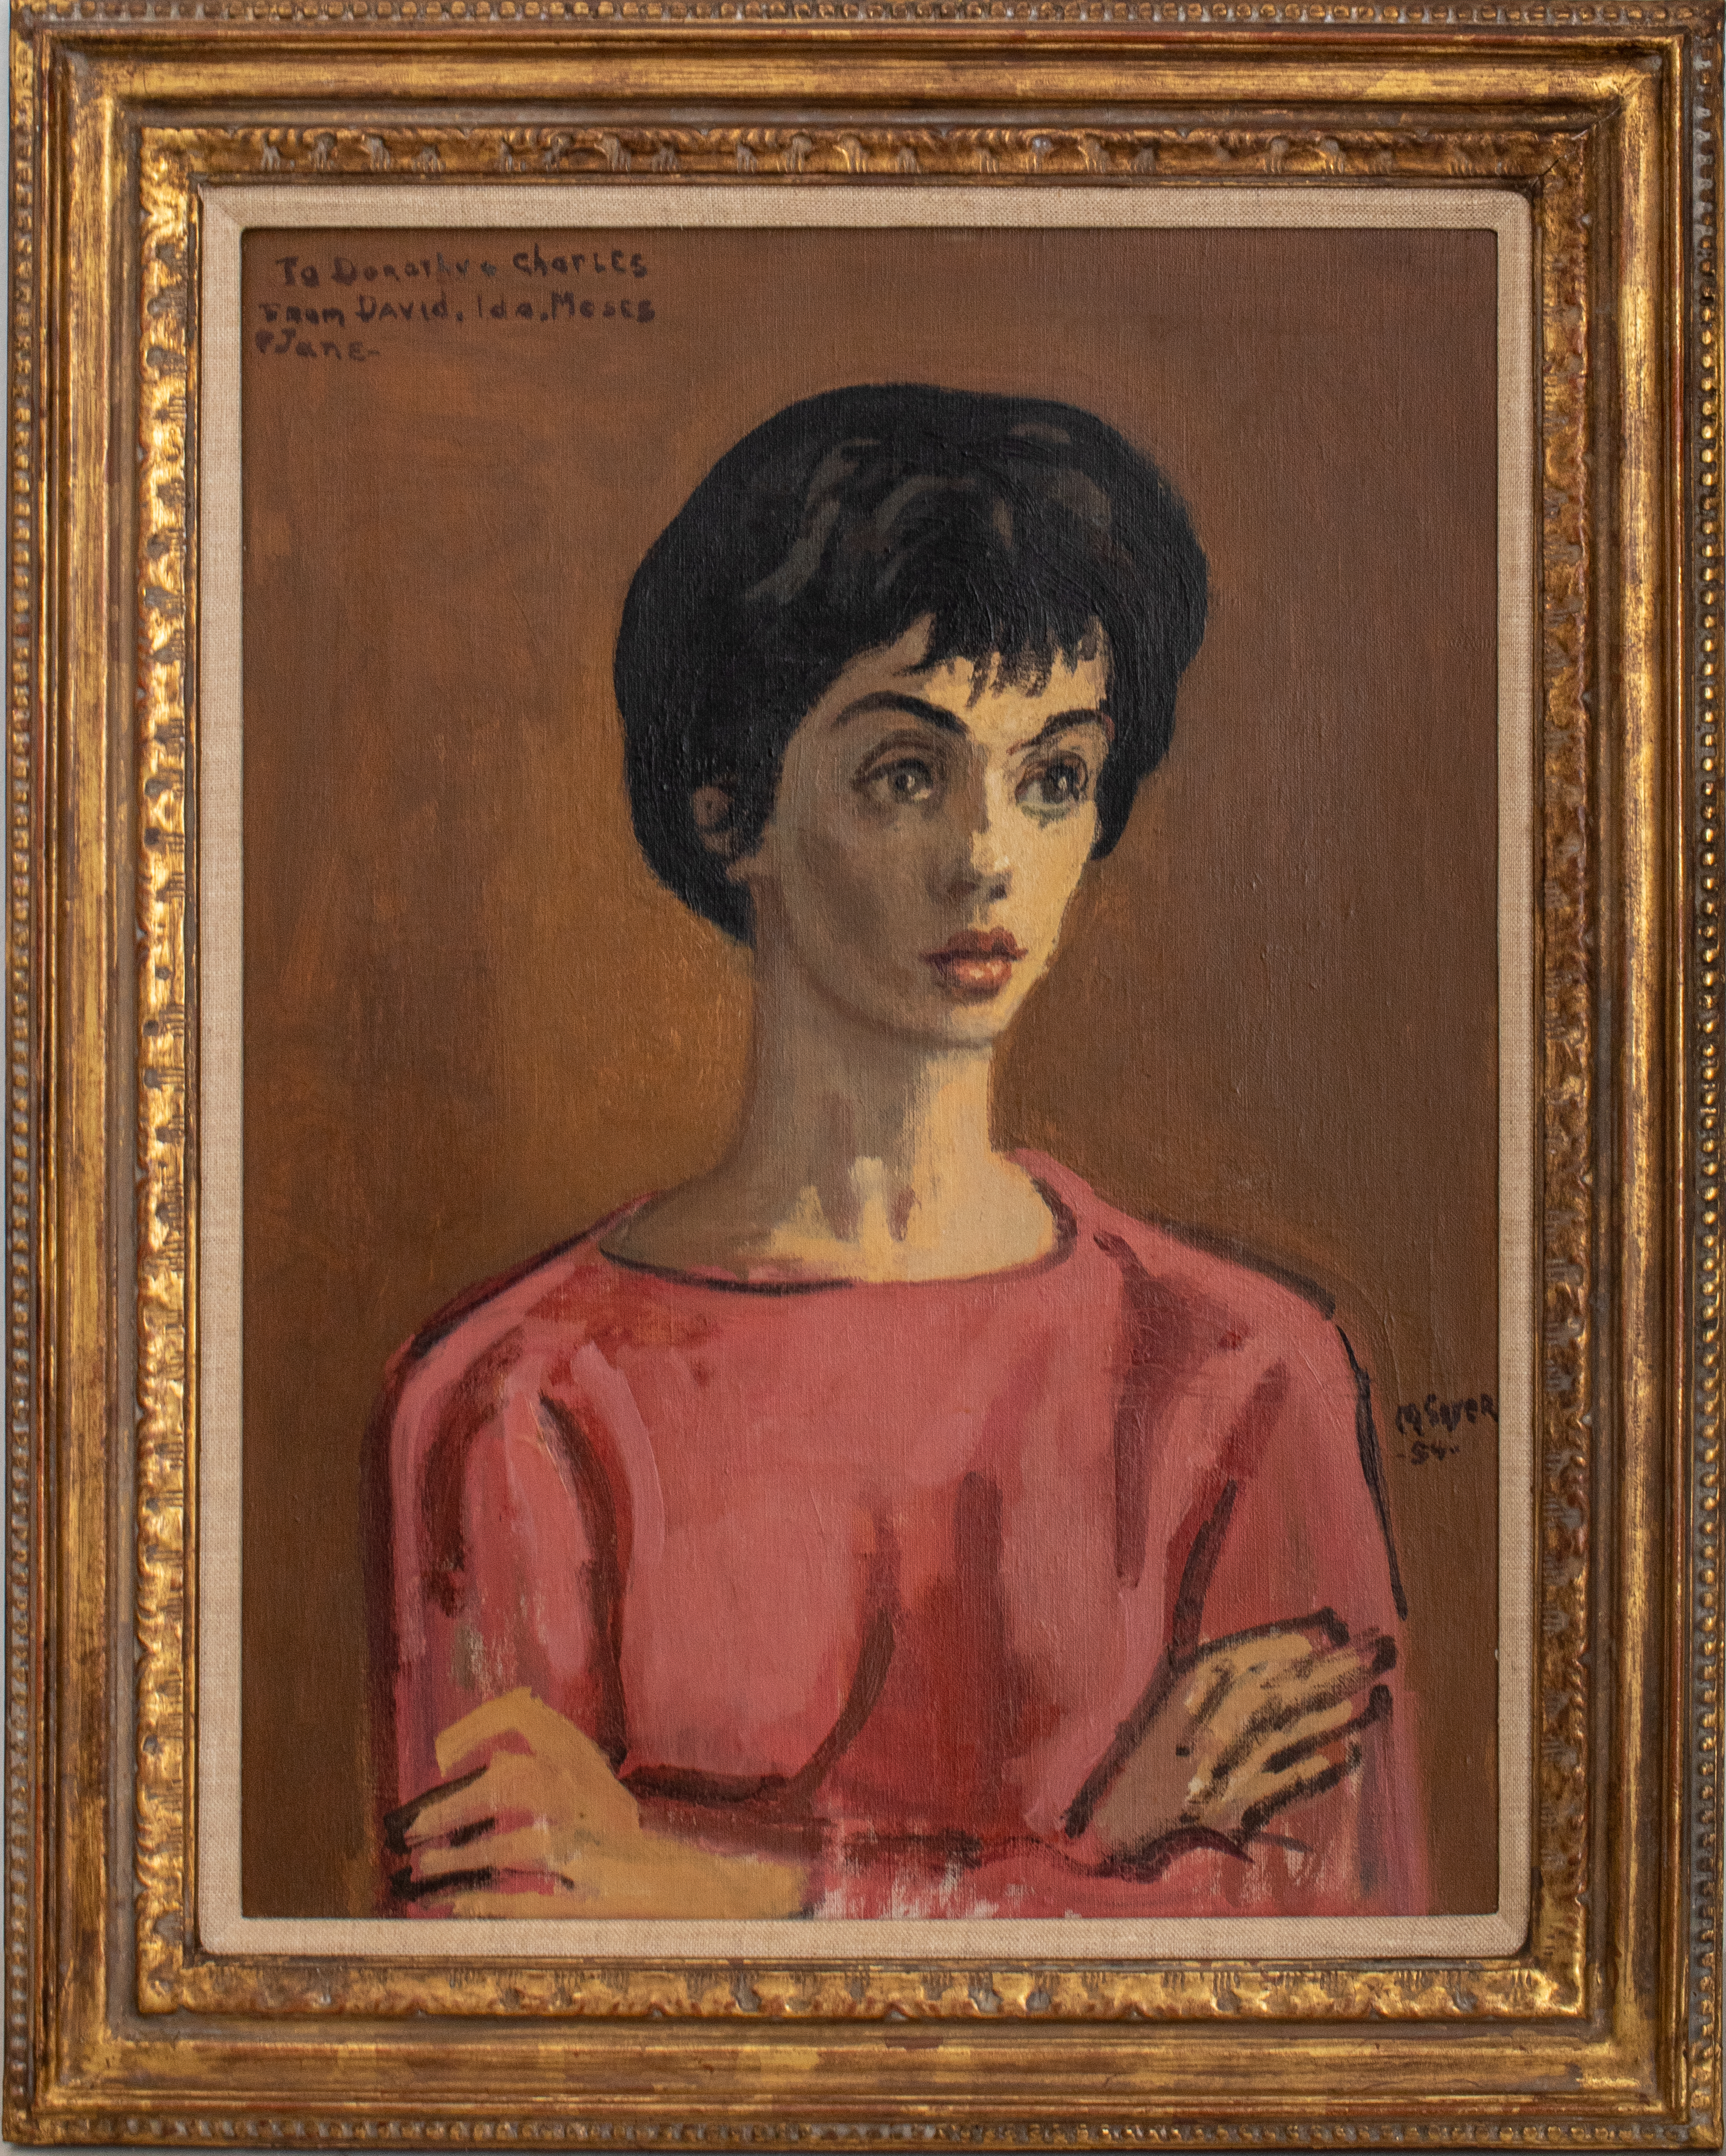 MOSES SOYER TO DOROTHY CHARLES  2bd6fc